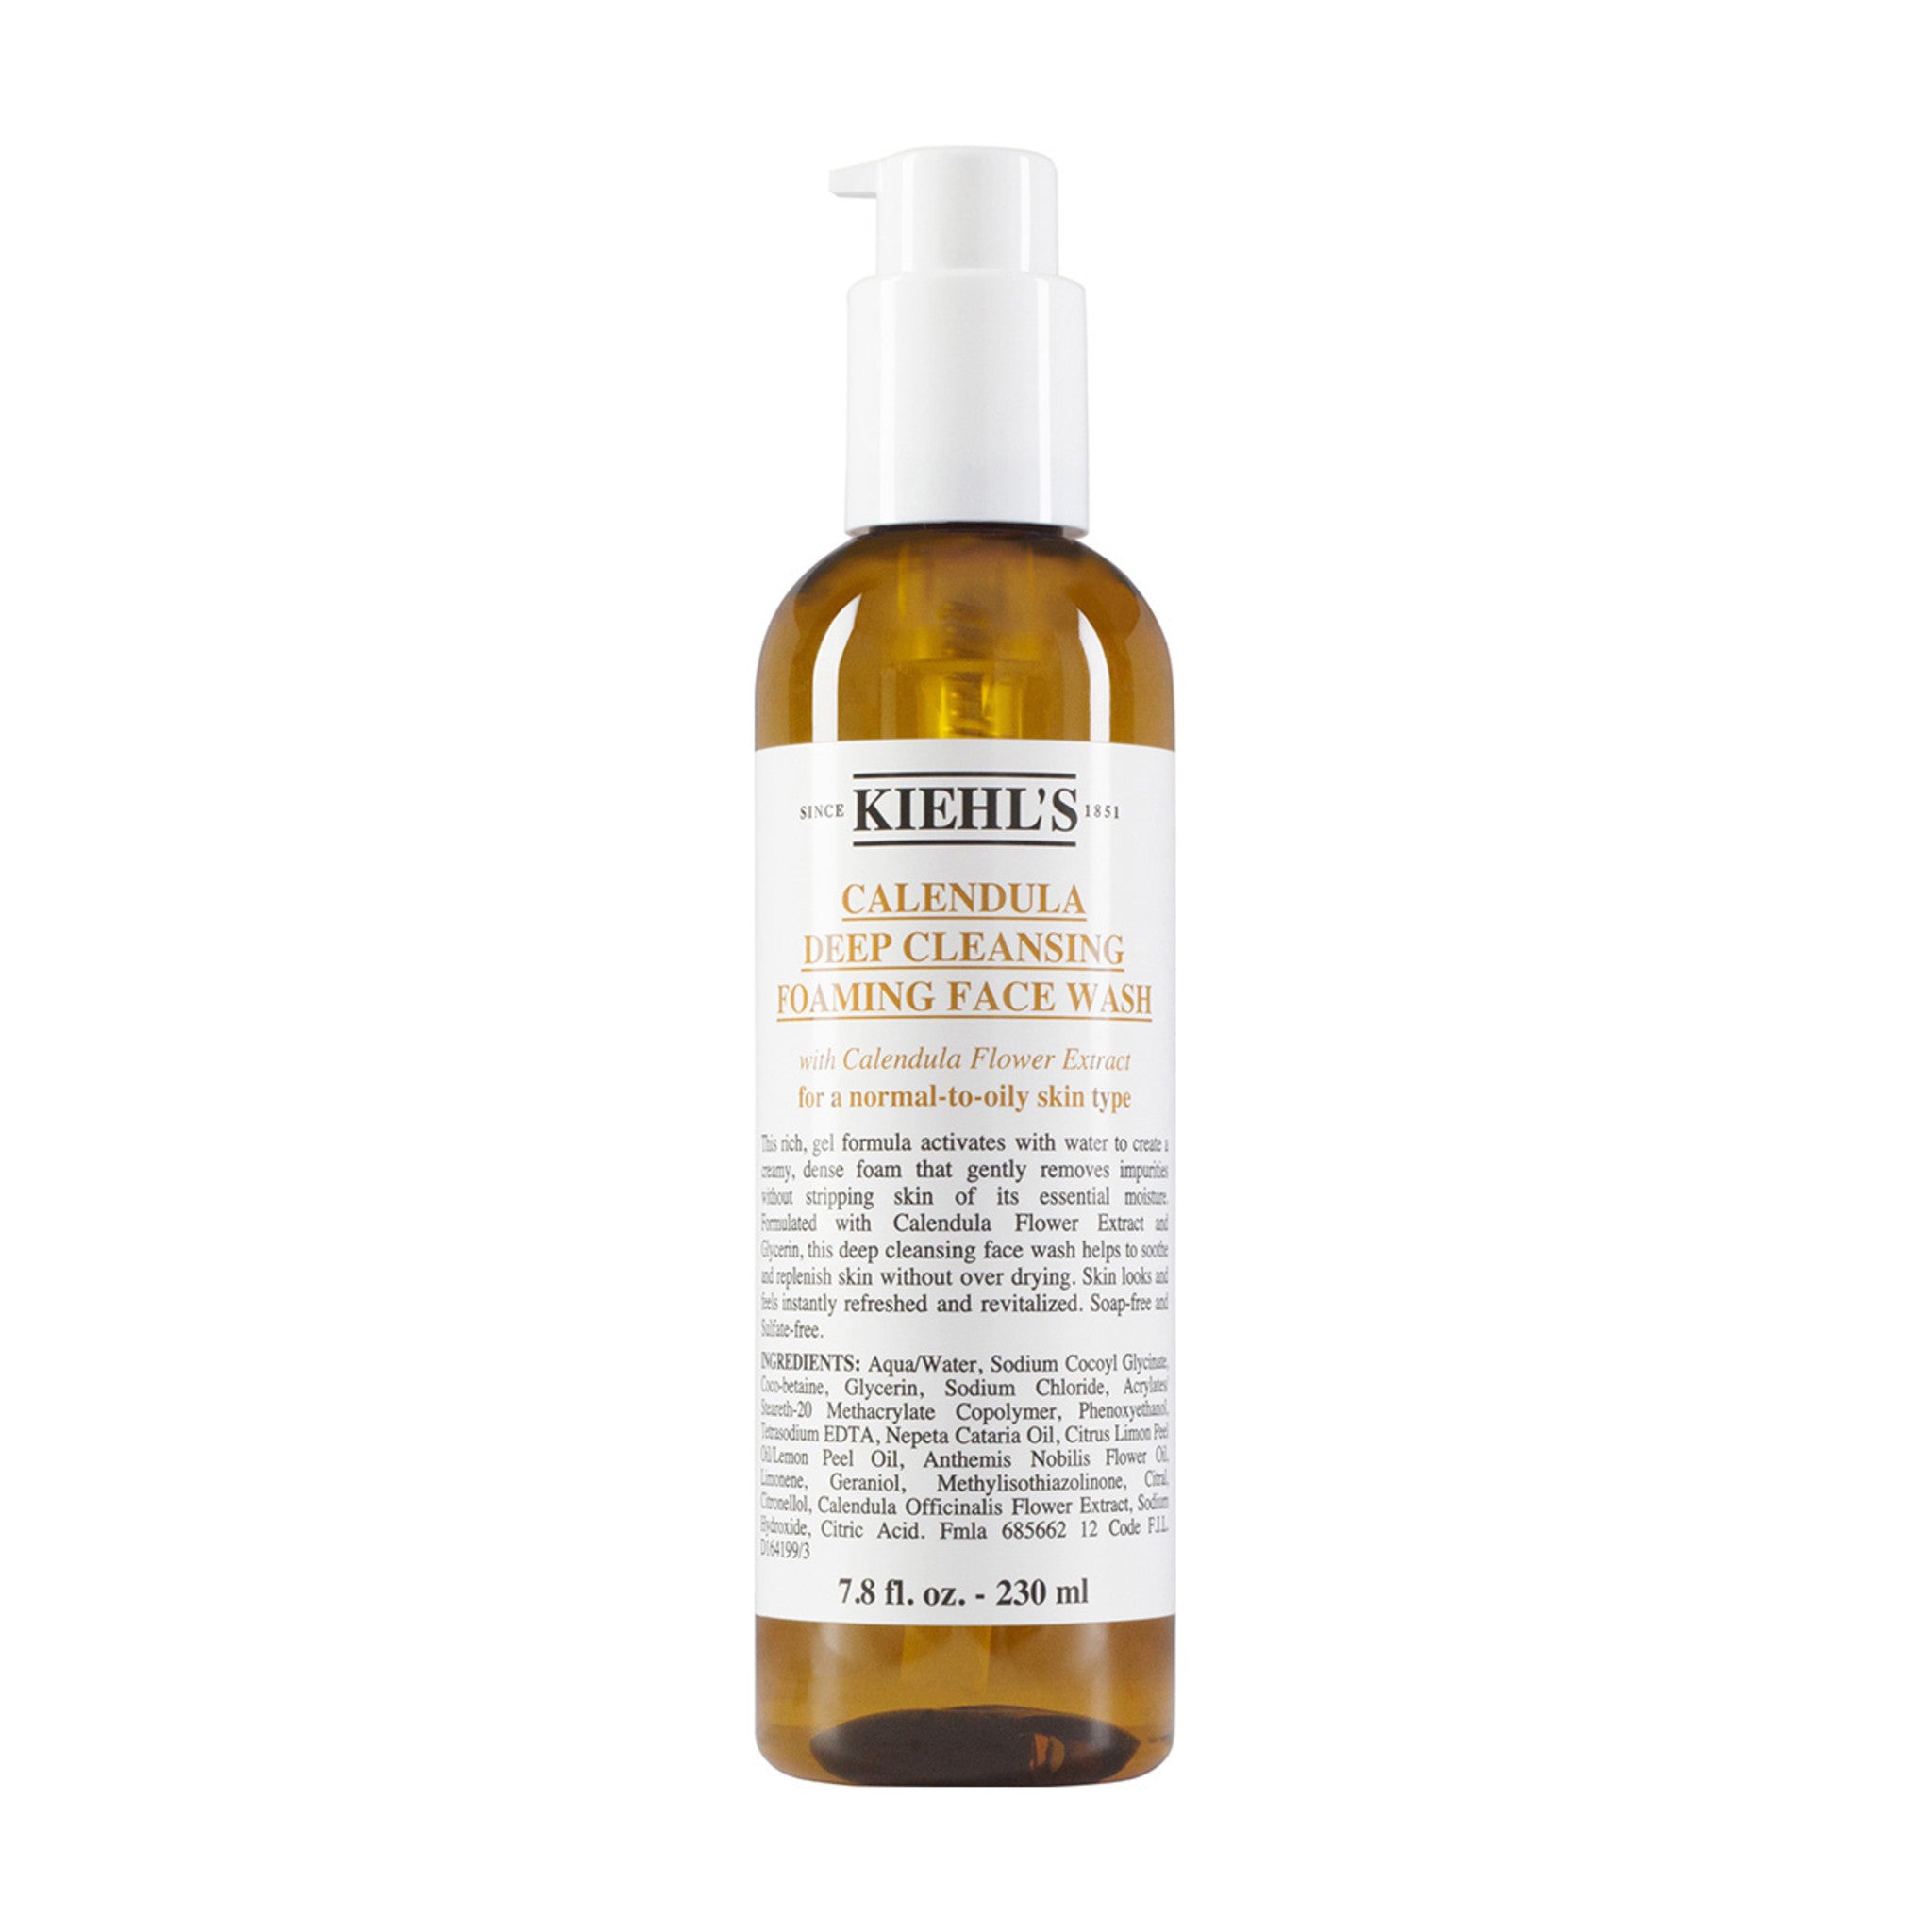 Kiehl's Since 1851 Calendula Deep Cleansing Foaming Face Wash Size variant: 7.8 fl oz | 230 ml main image.